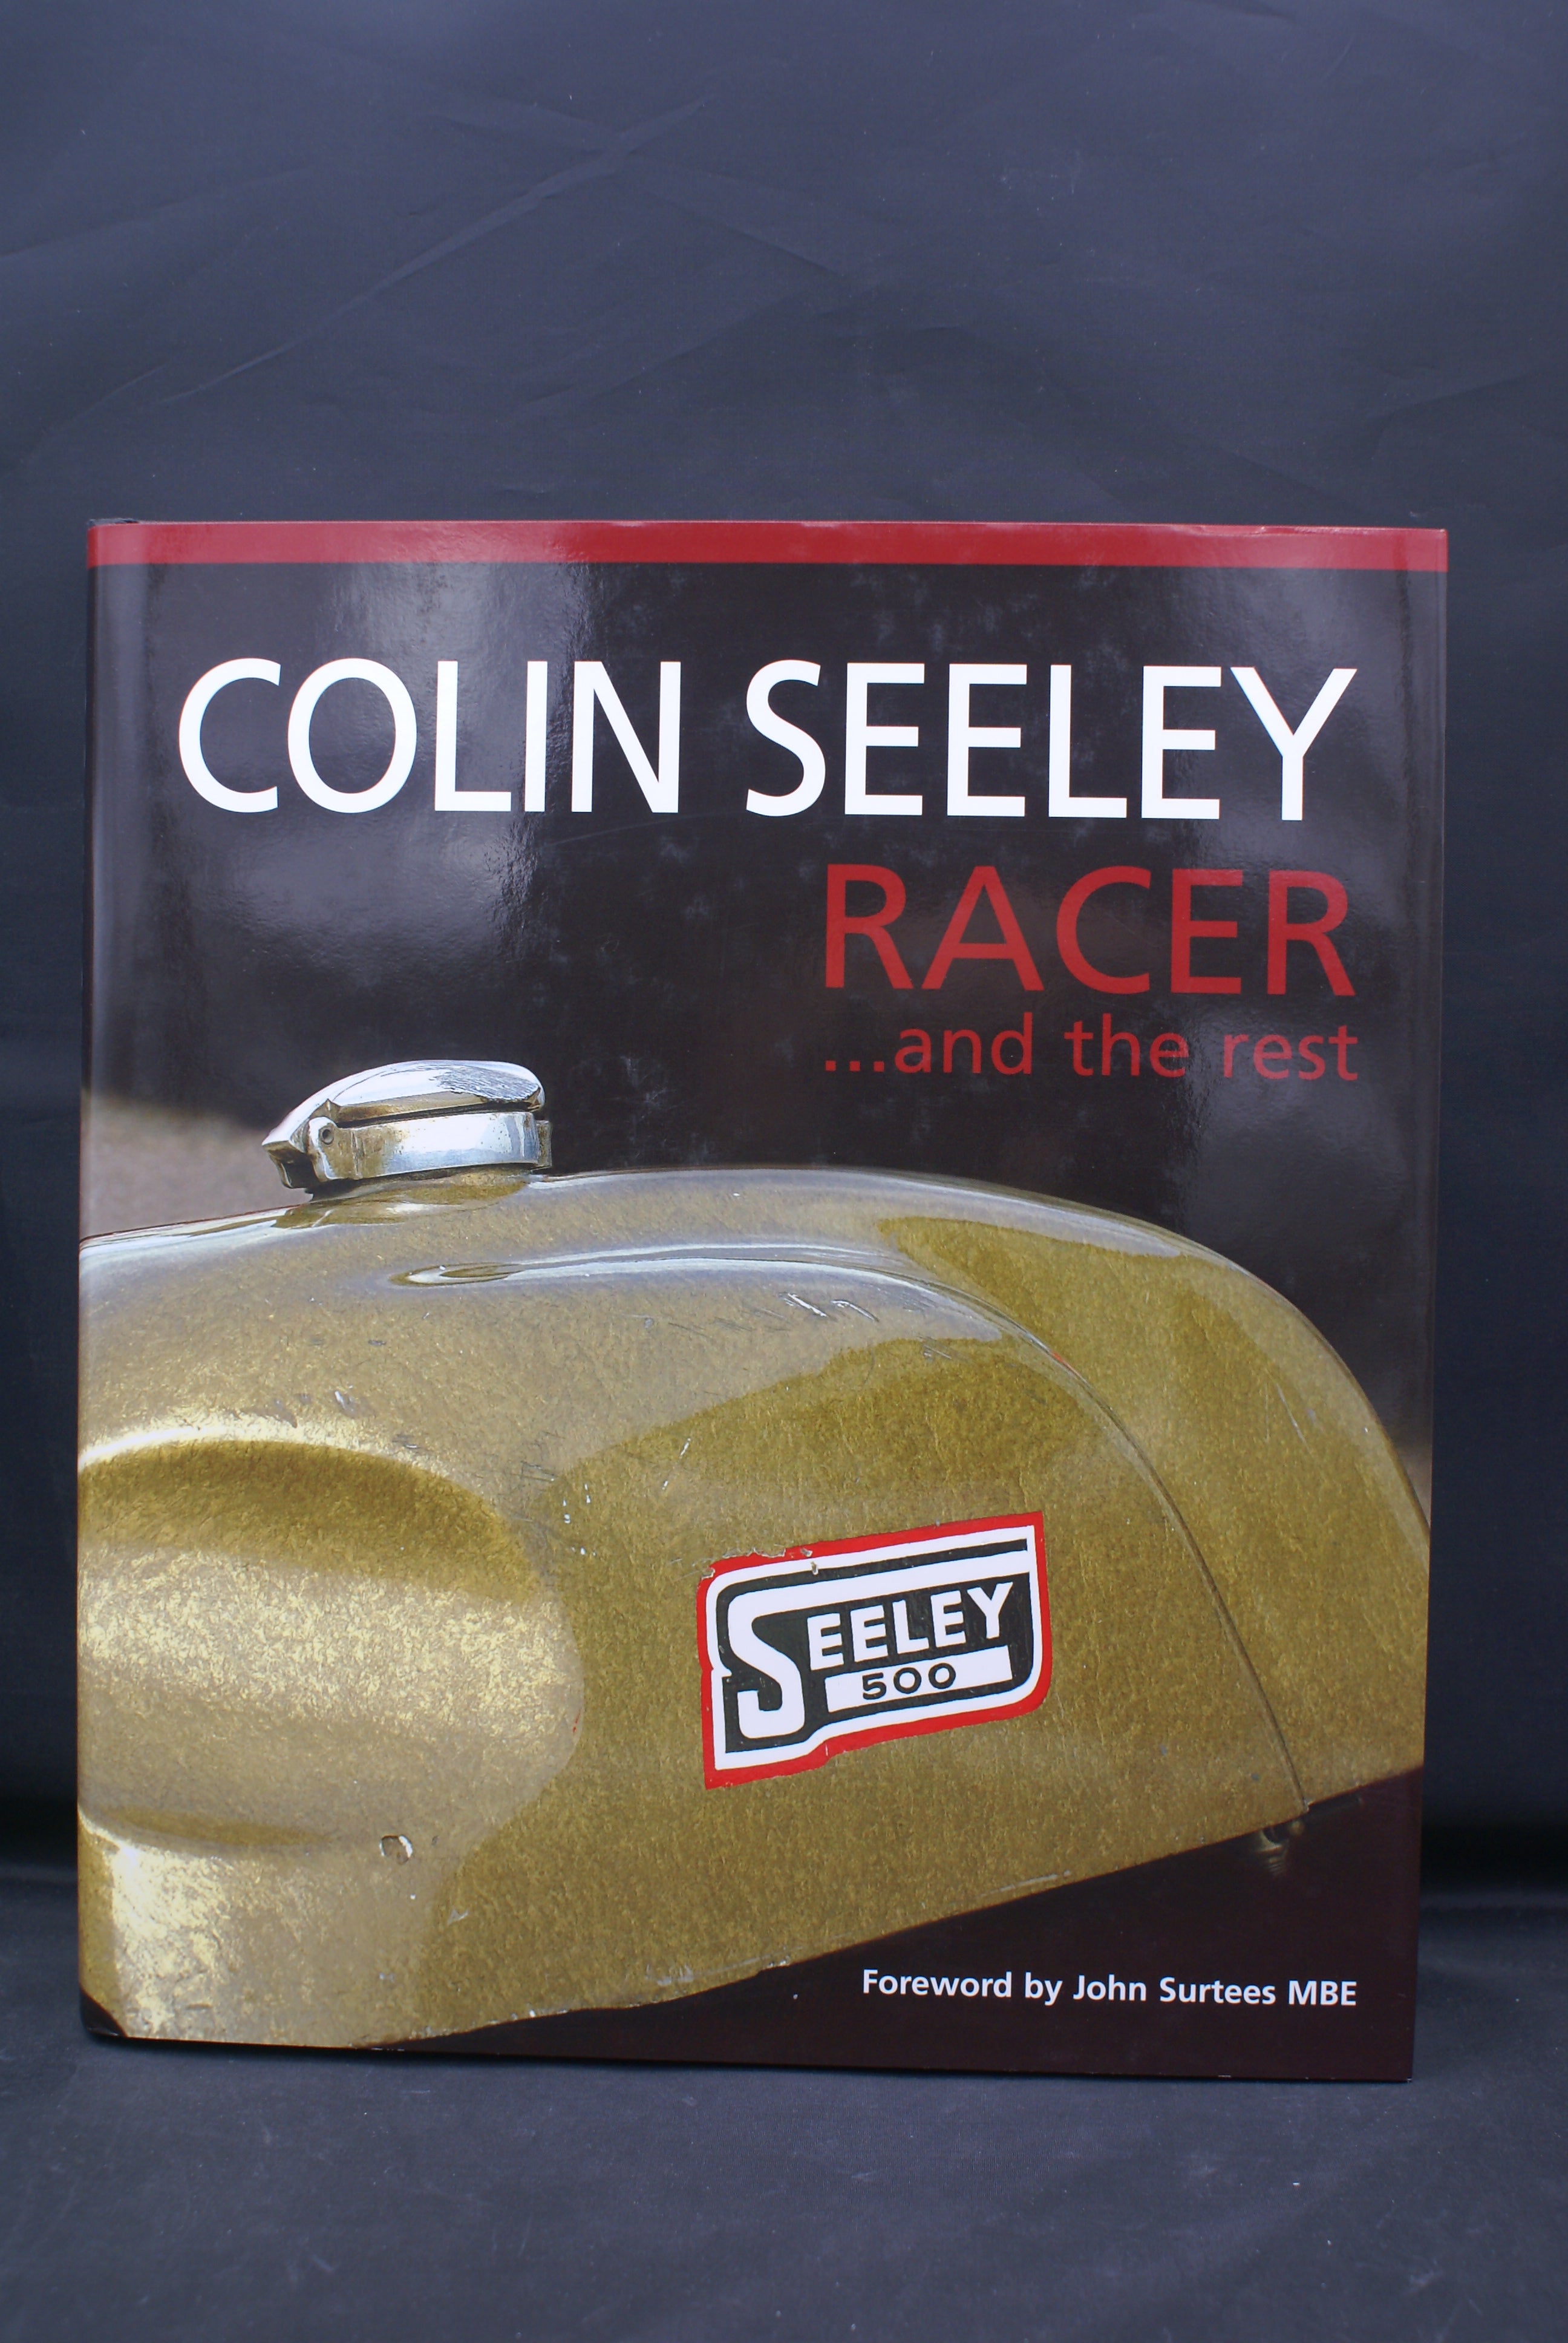 Colin Seeley, Racer....and the rest